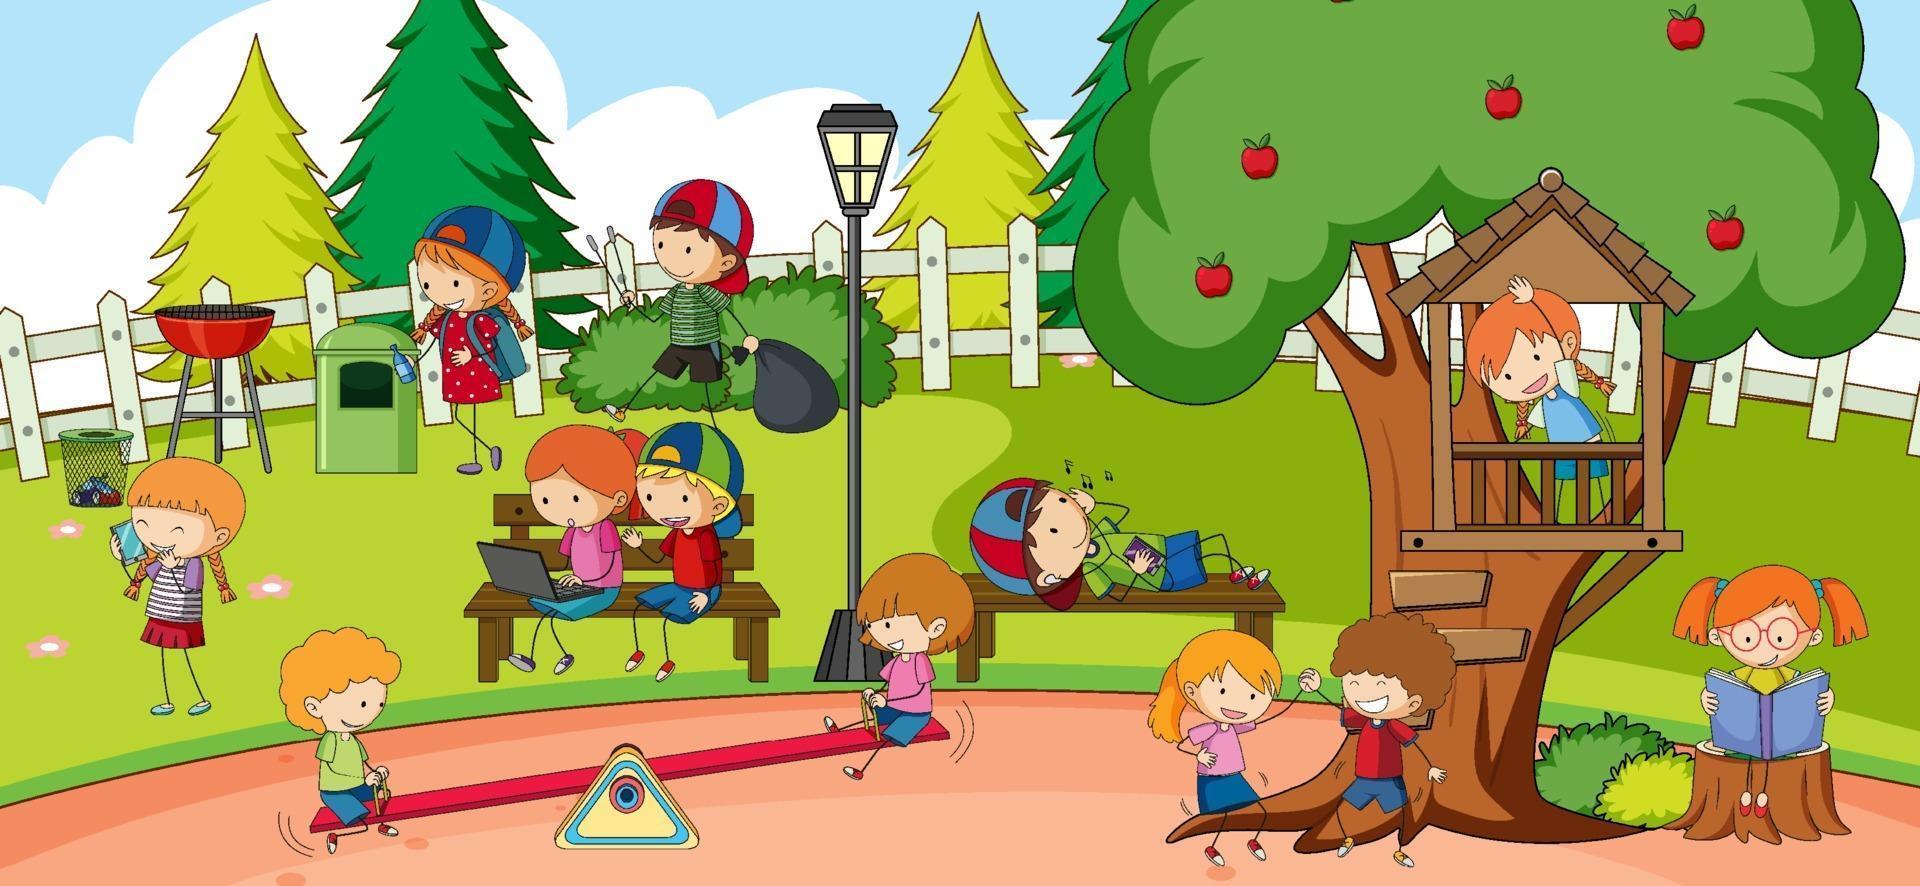 Playground scene with many kids doodle cartoon character vector